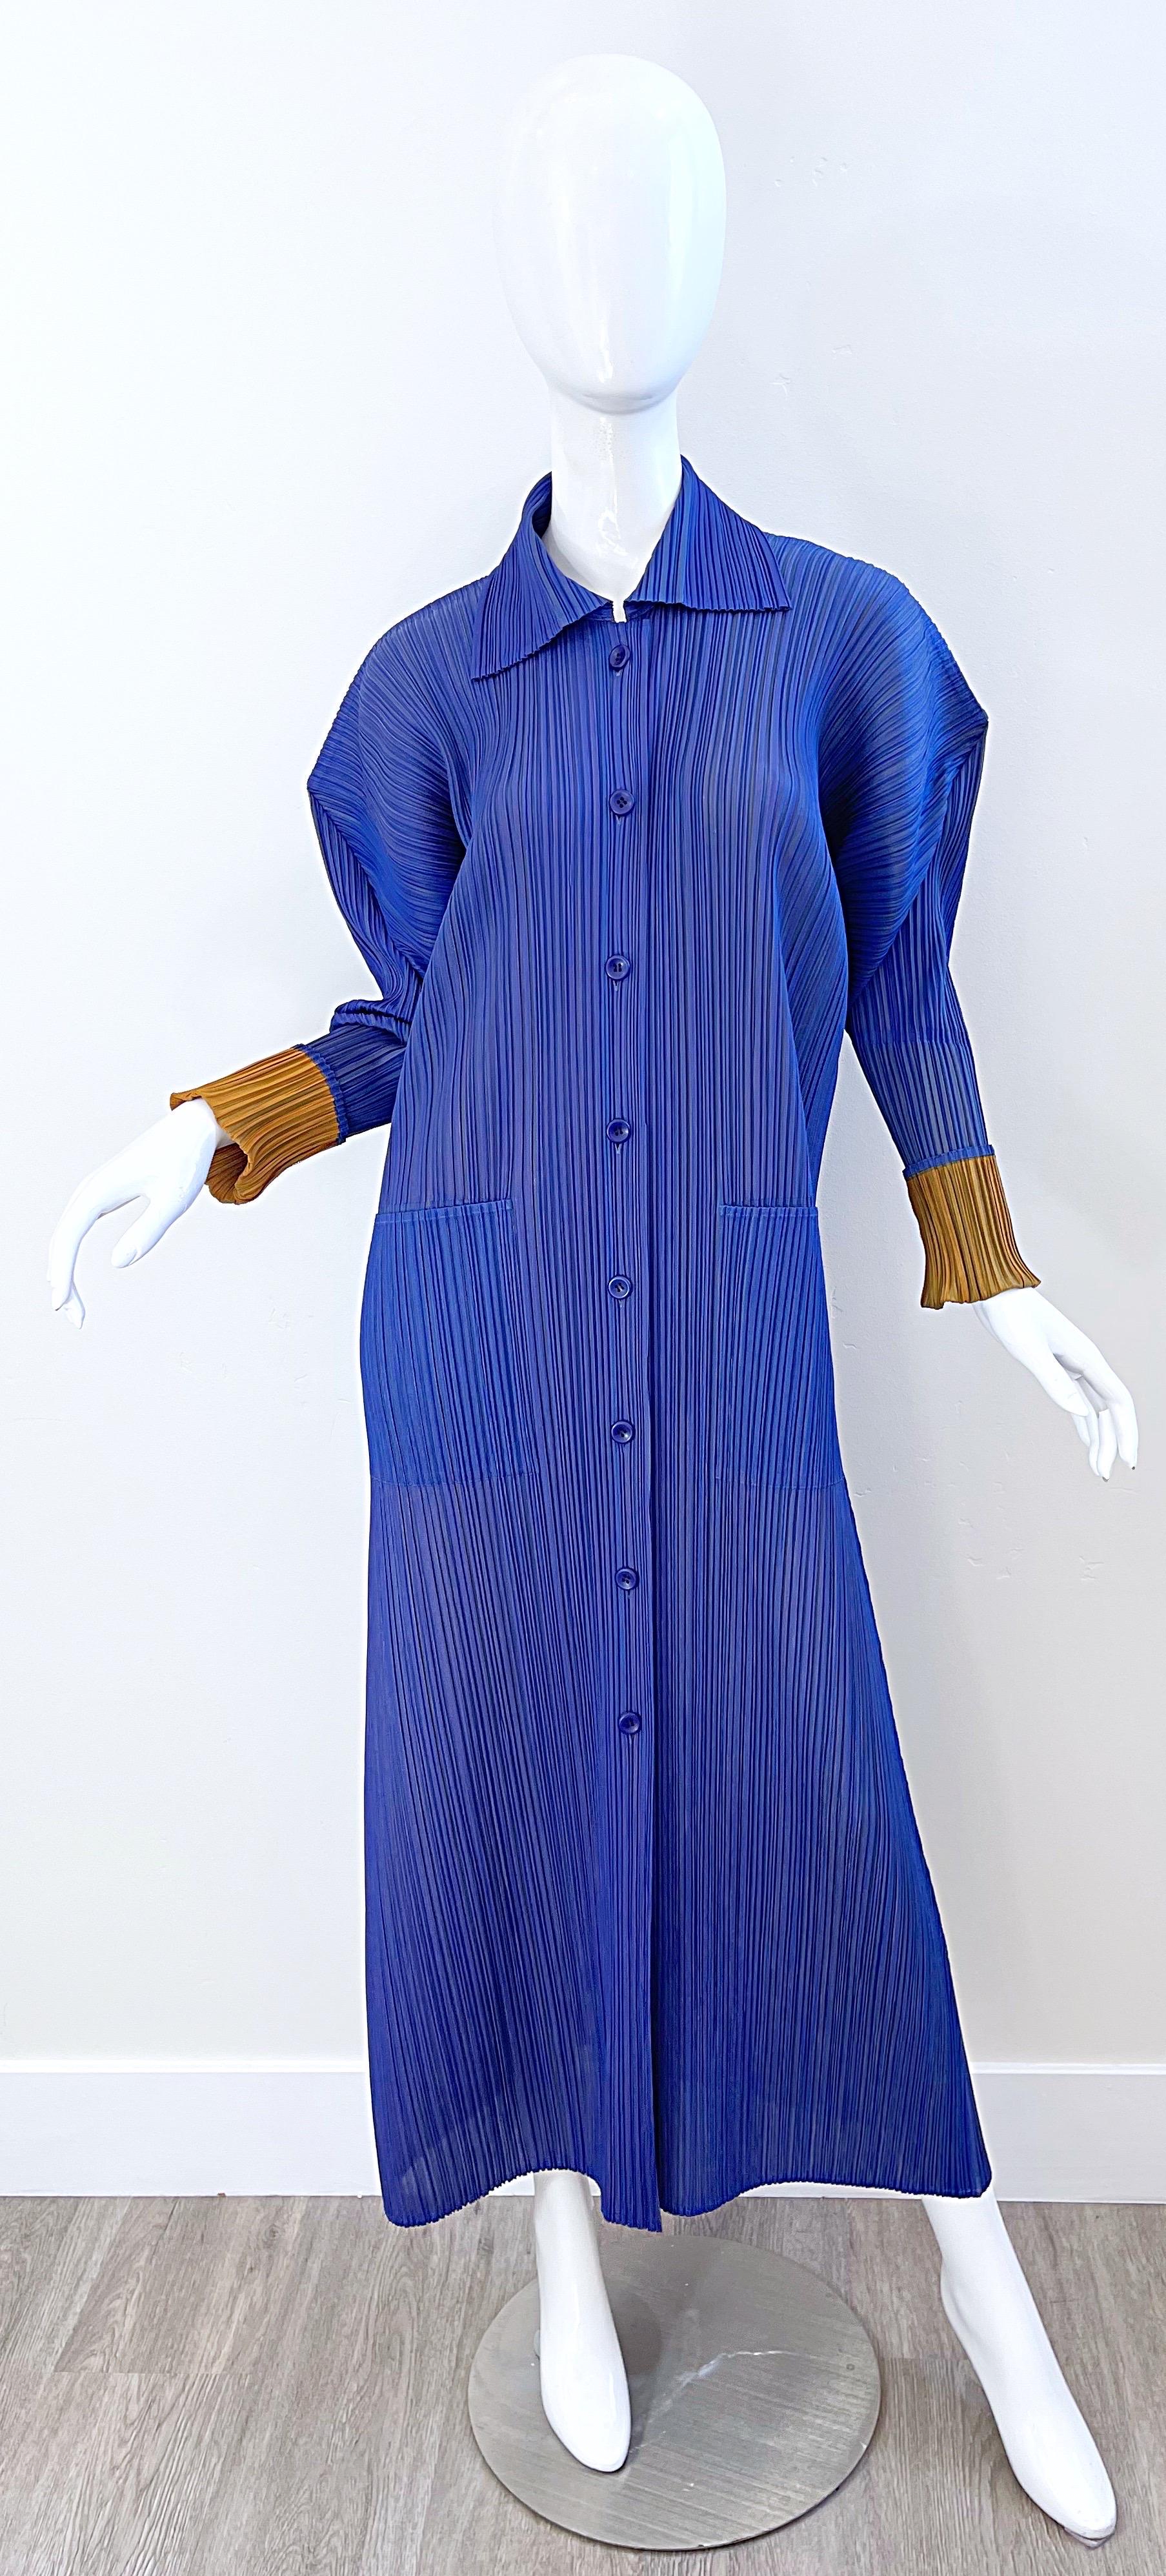 Avant Garde ISSEY MIYAKE Pleats Please blue and marigold pleated duster jacket / long cardigan. Signature Miyake pleats that are so easy to wear. Intricate architecture shoulders. Pockets at each side of the hips. Buttons up the front. Marigold